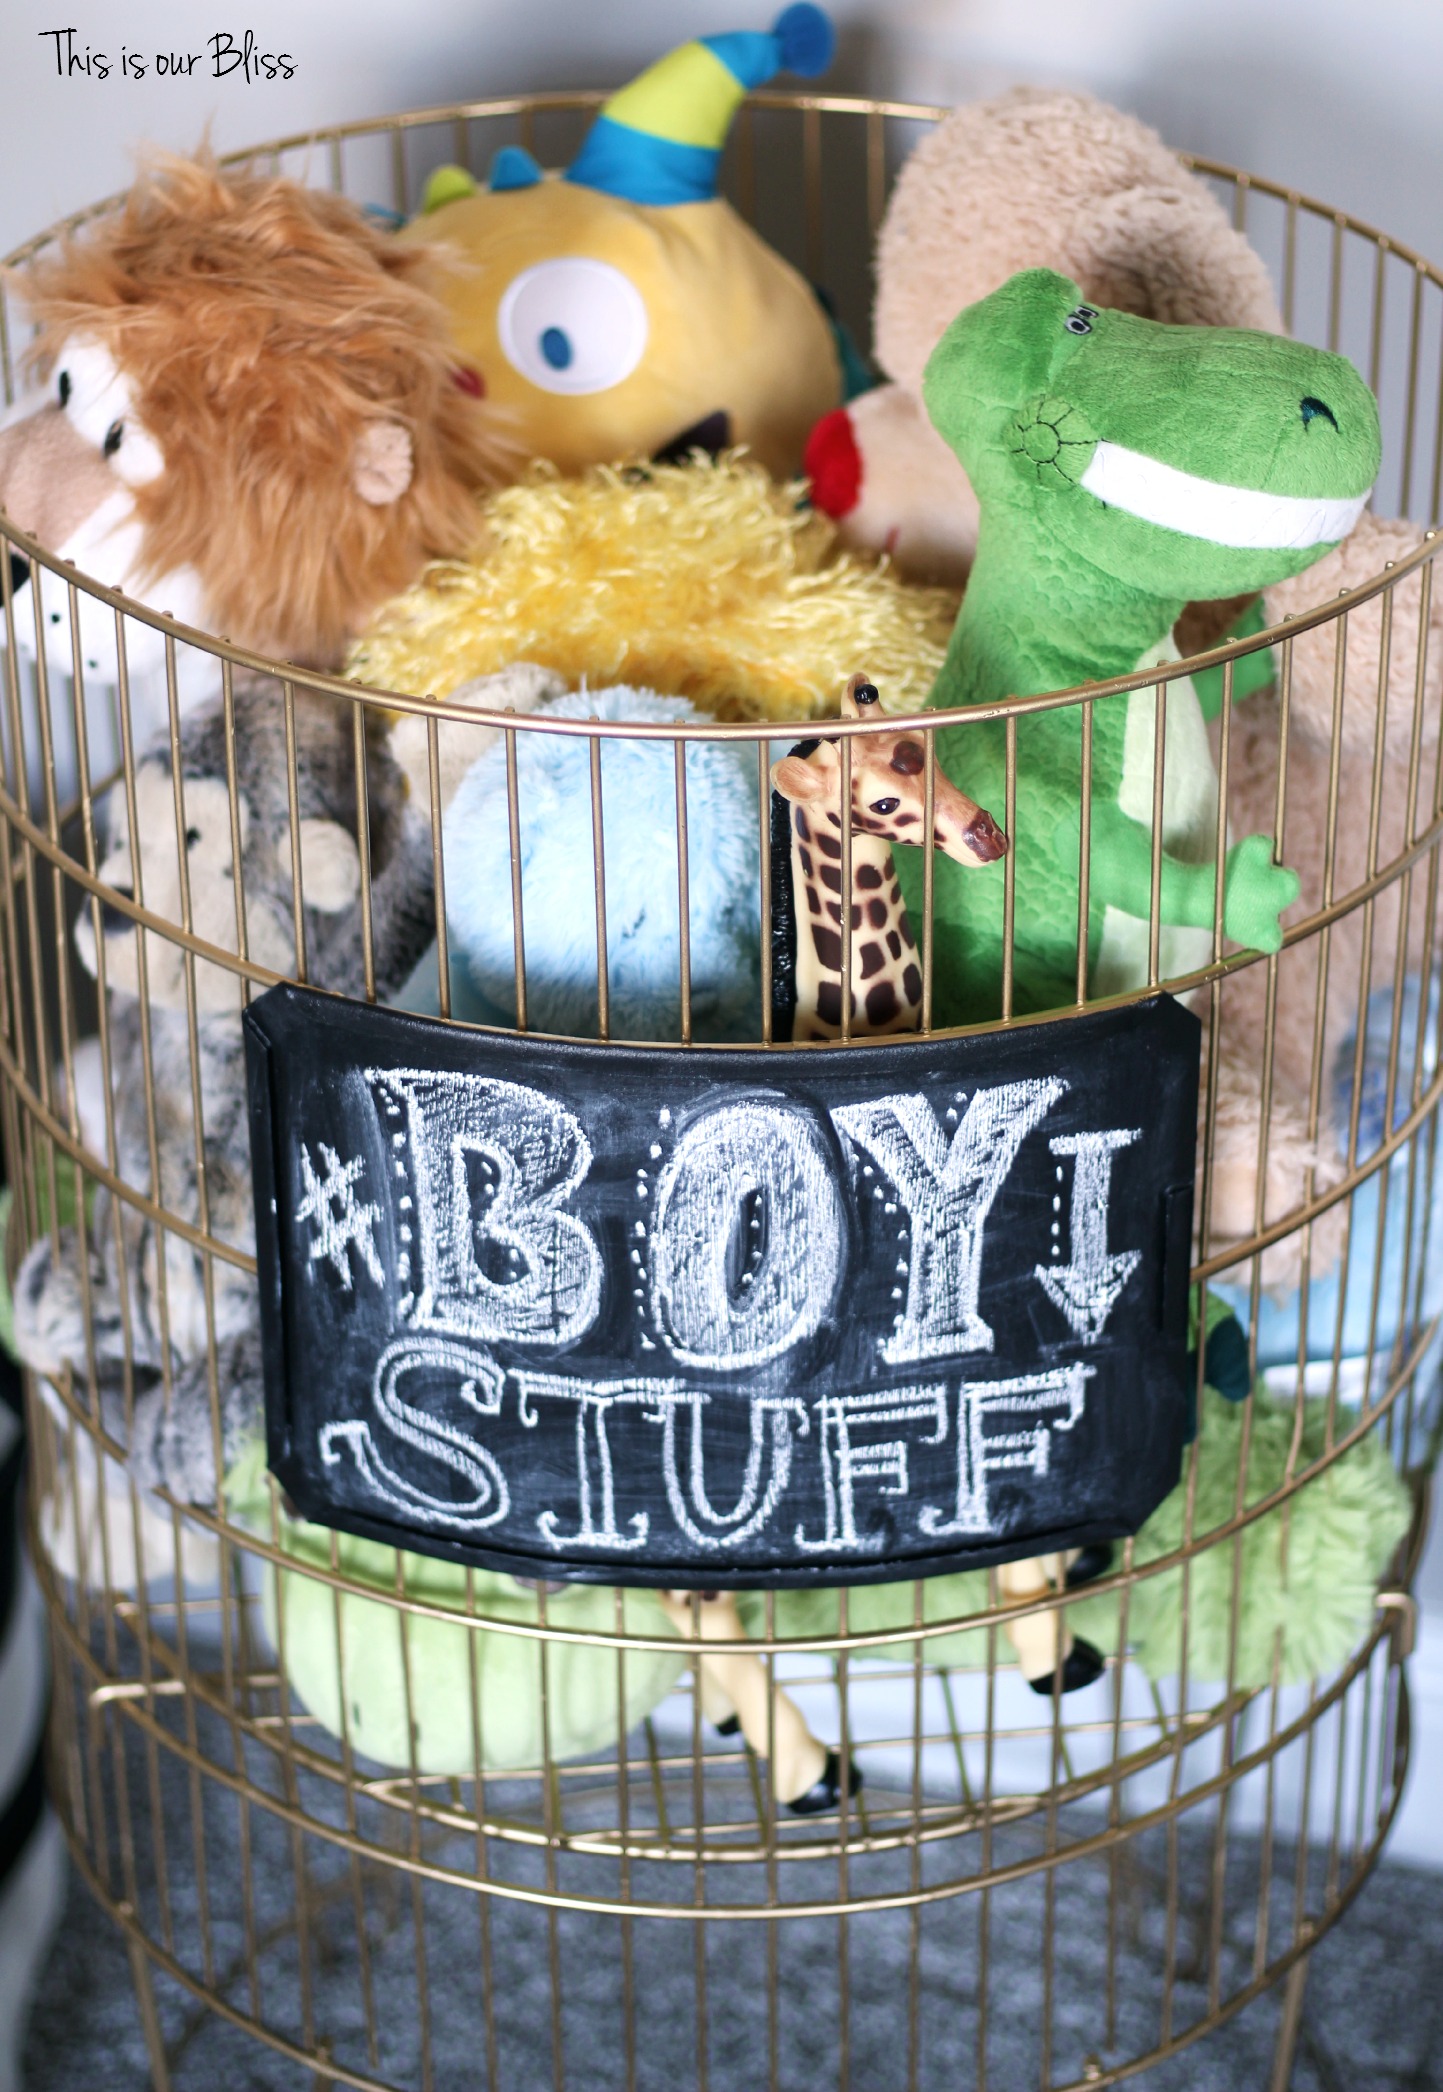 DIY metal toy bin gold spray paint & chalkboard paint boy stuff playroom This is our Bliss